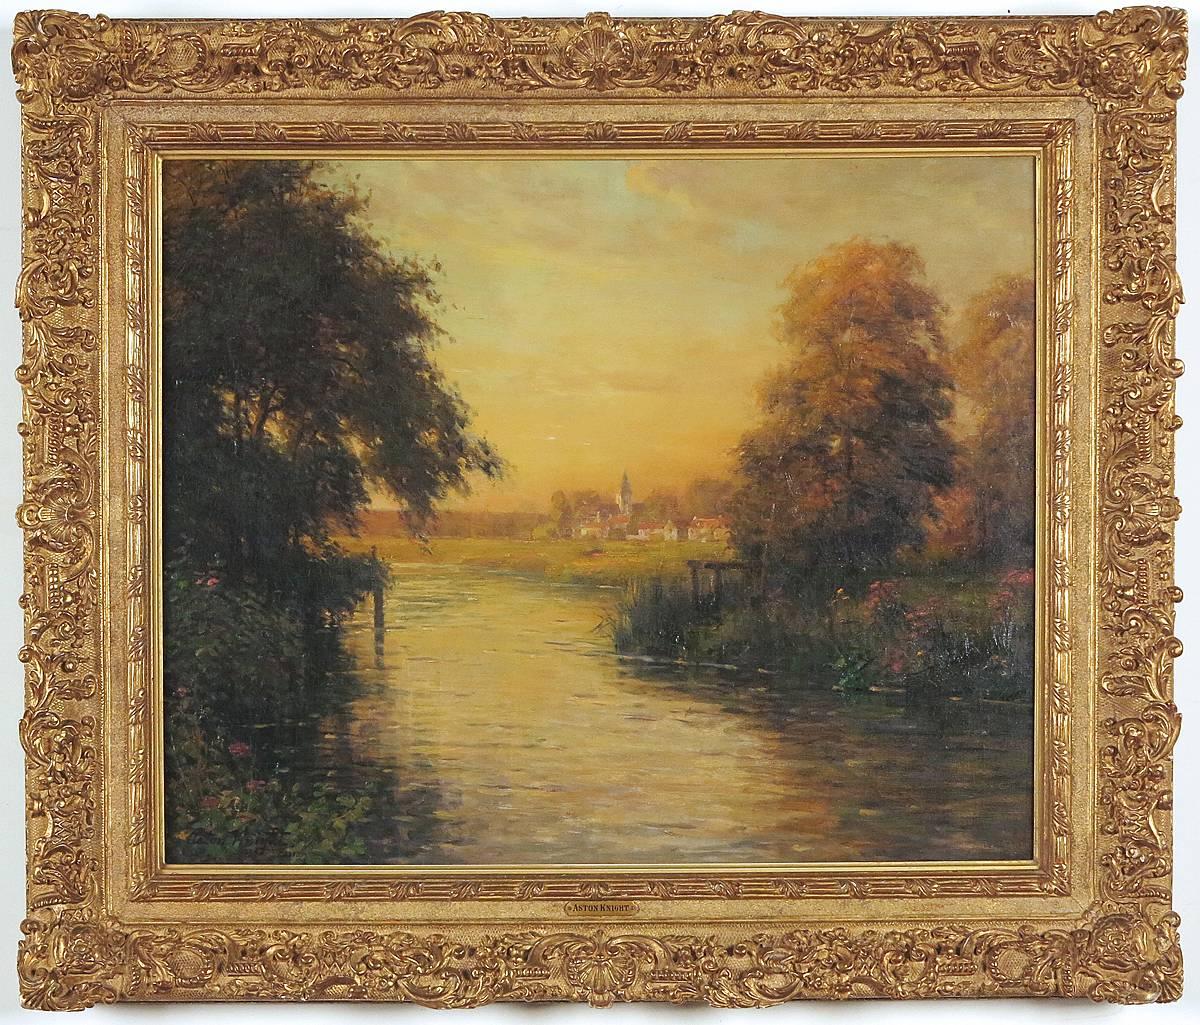 Twilight along the River Bend  - Painting by Louis Aston Knight